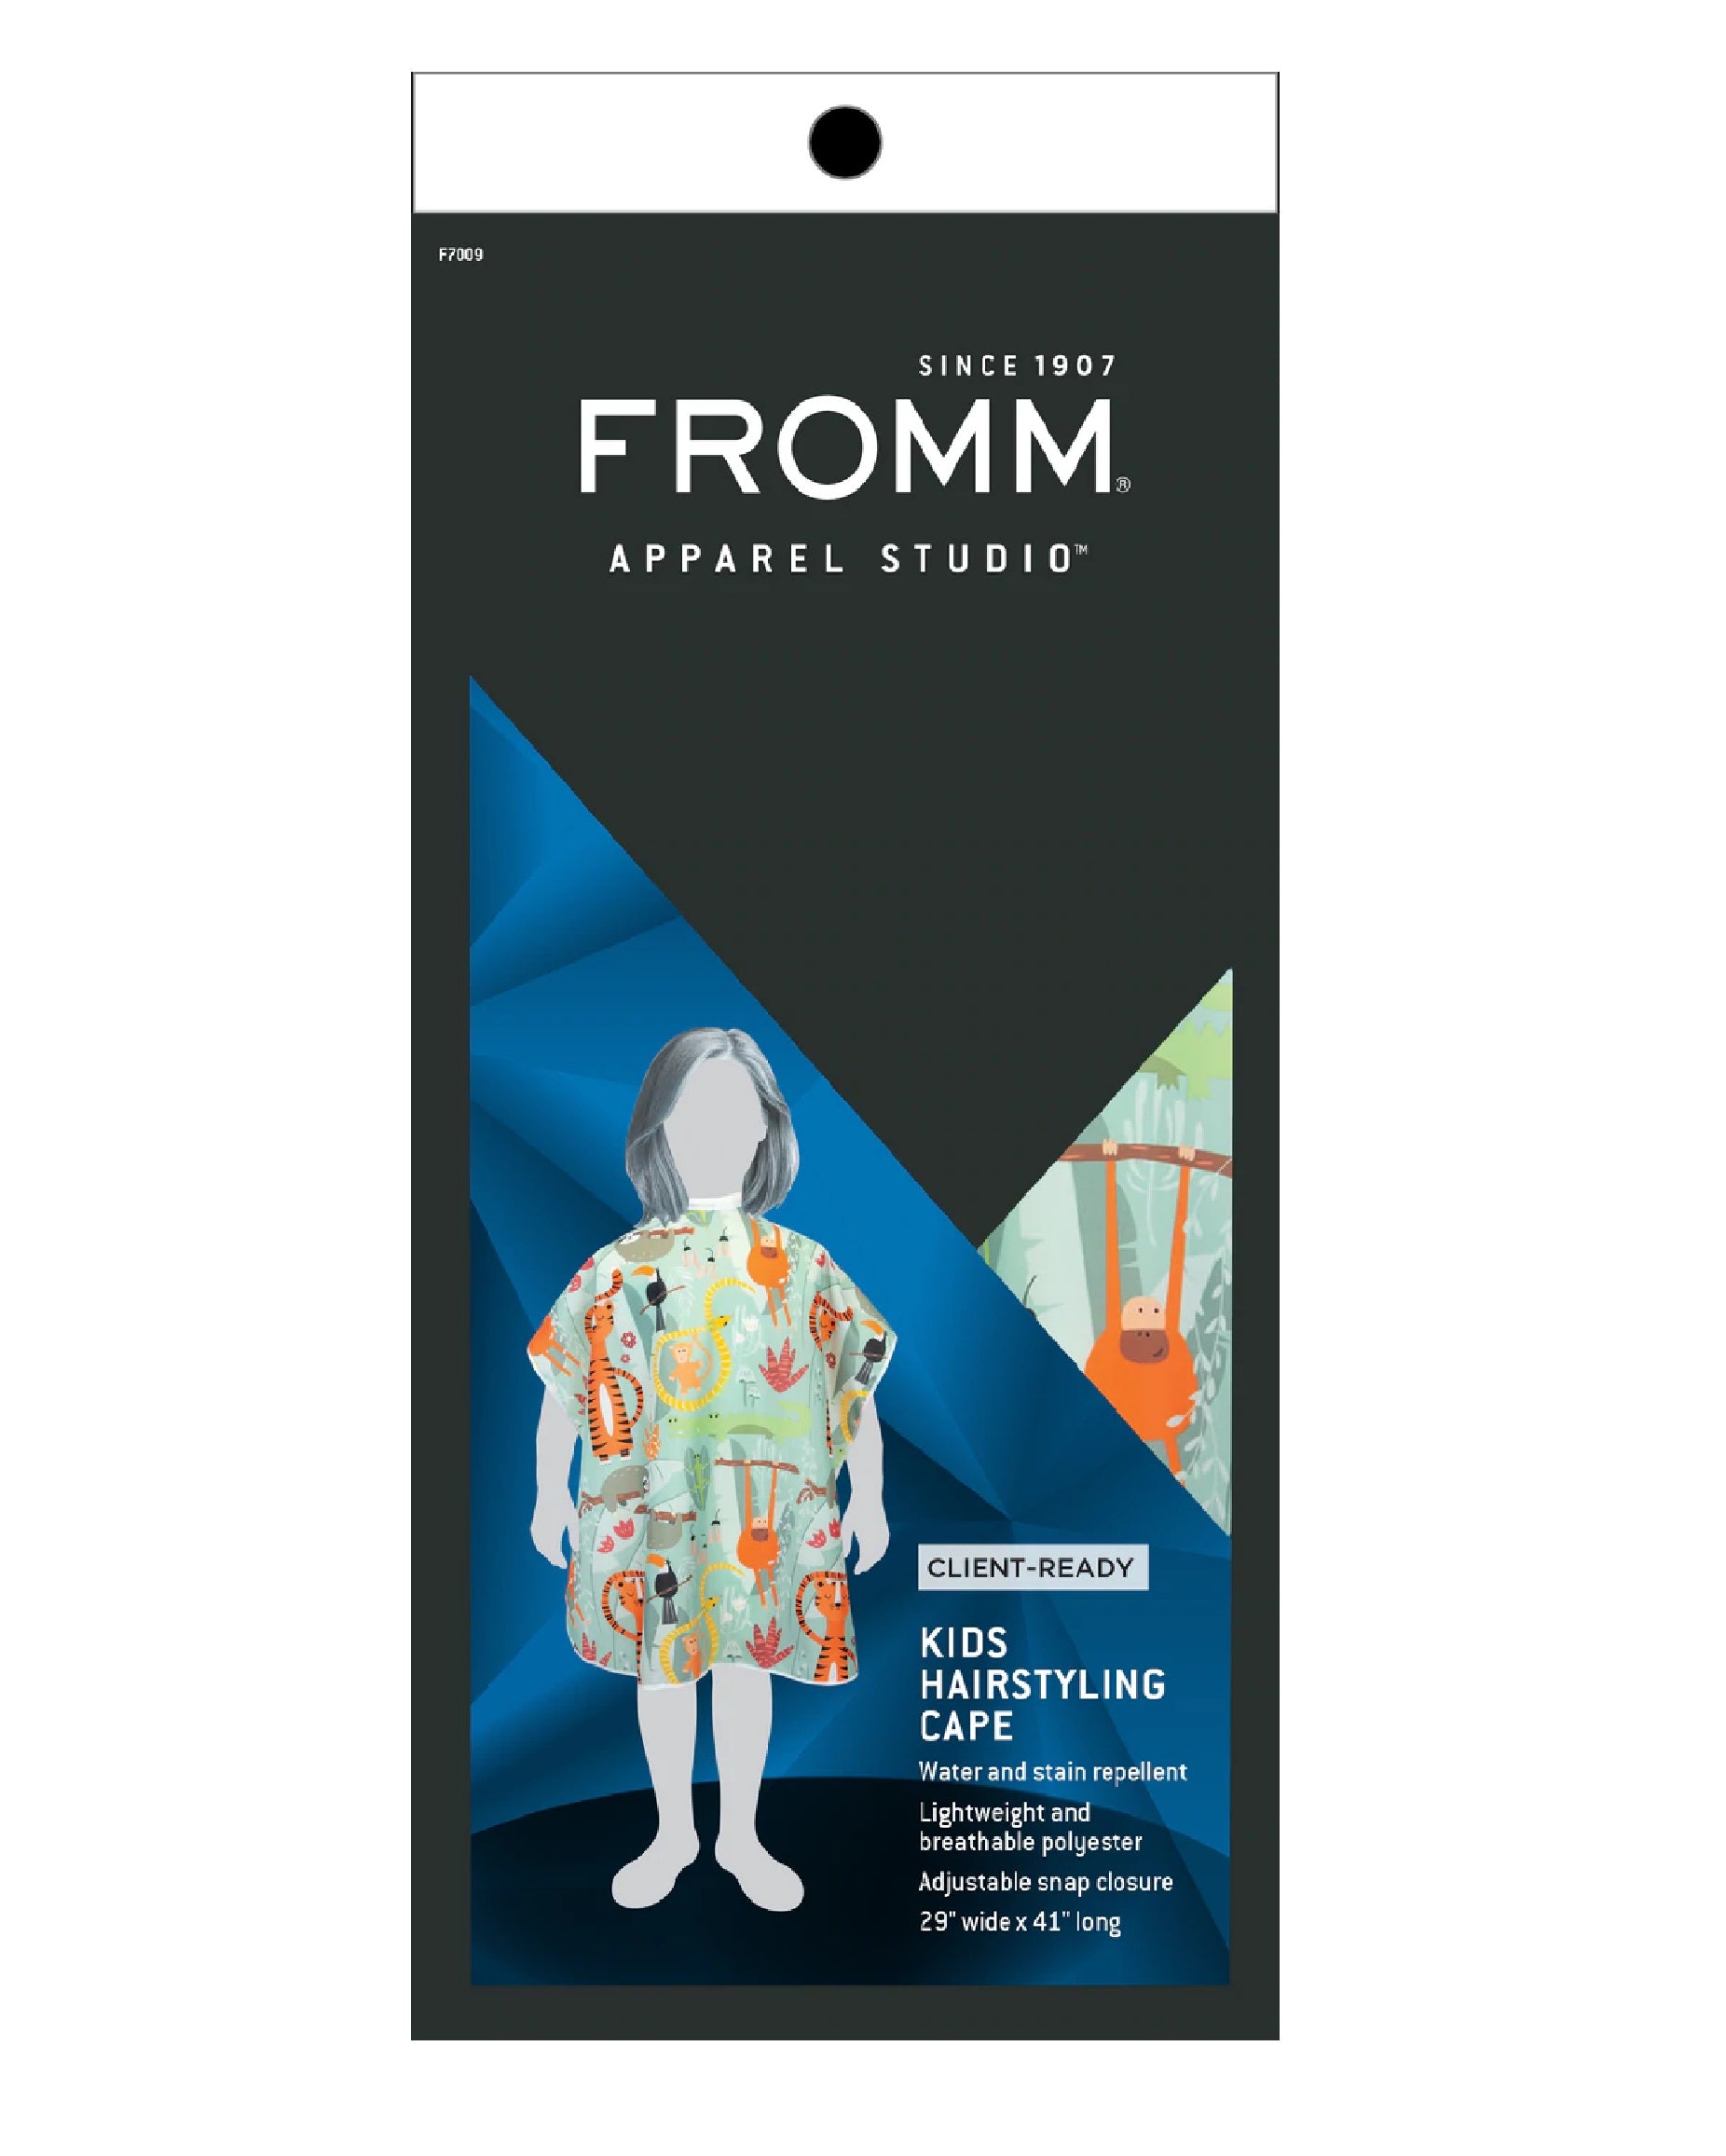 FROMM Kids Hairstyling Cape 29X41 F7009